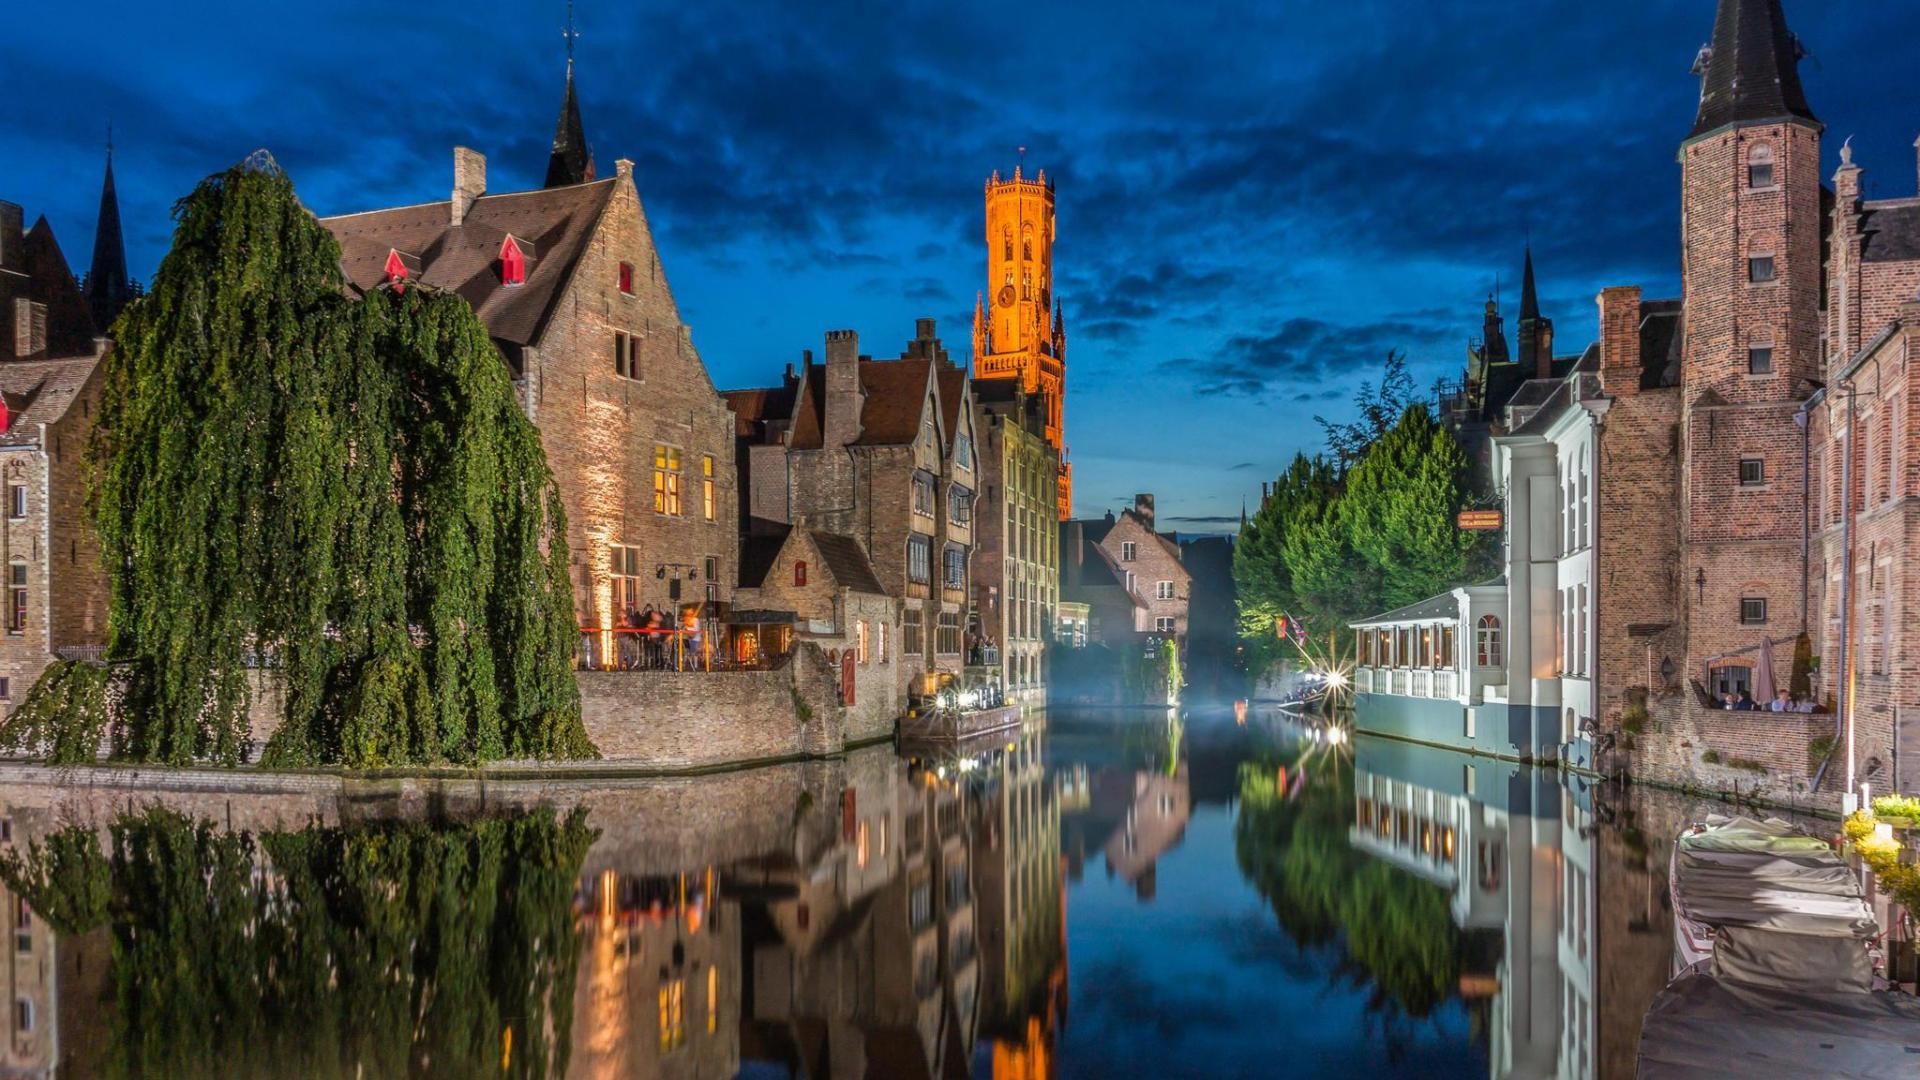 Architecture Building Bruges Belgium Town Old Building House Tower Ancient Water Trees Night Reflect 1920x1080